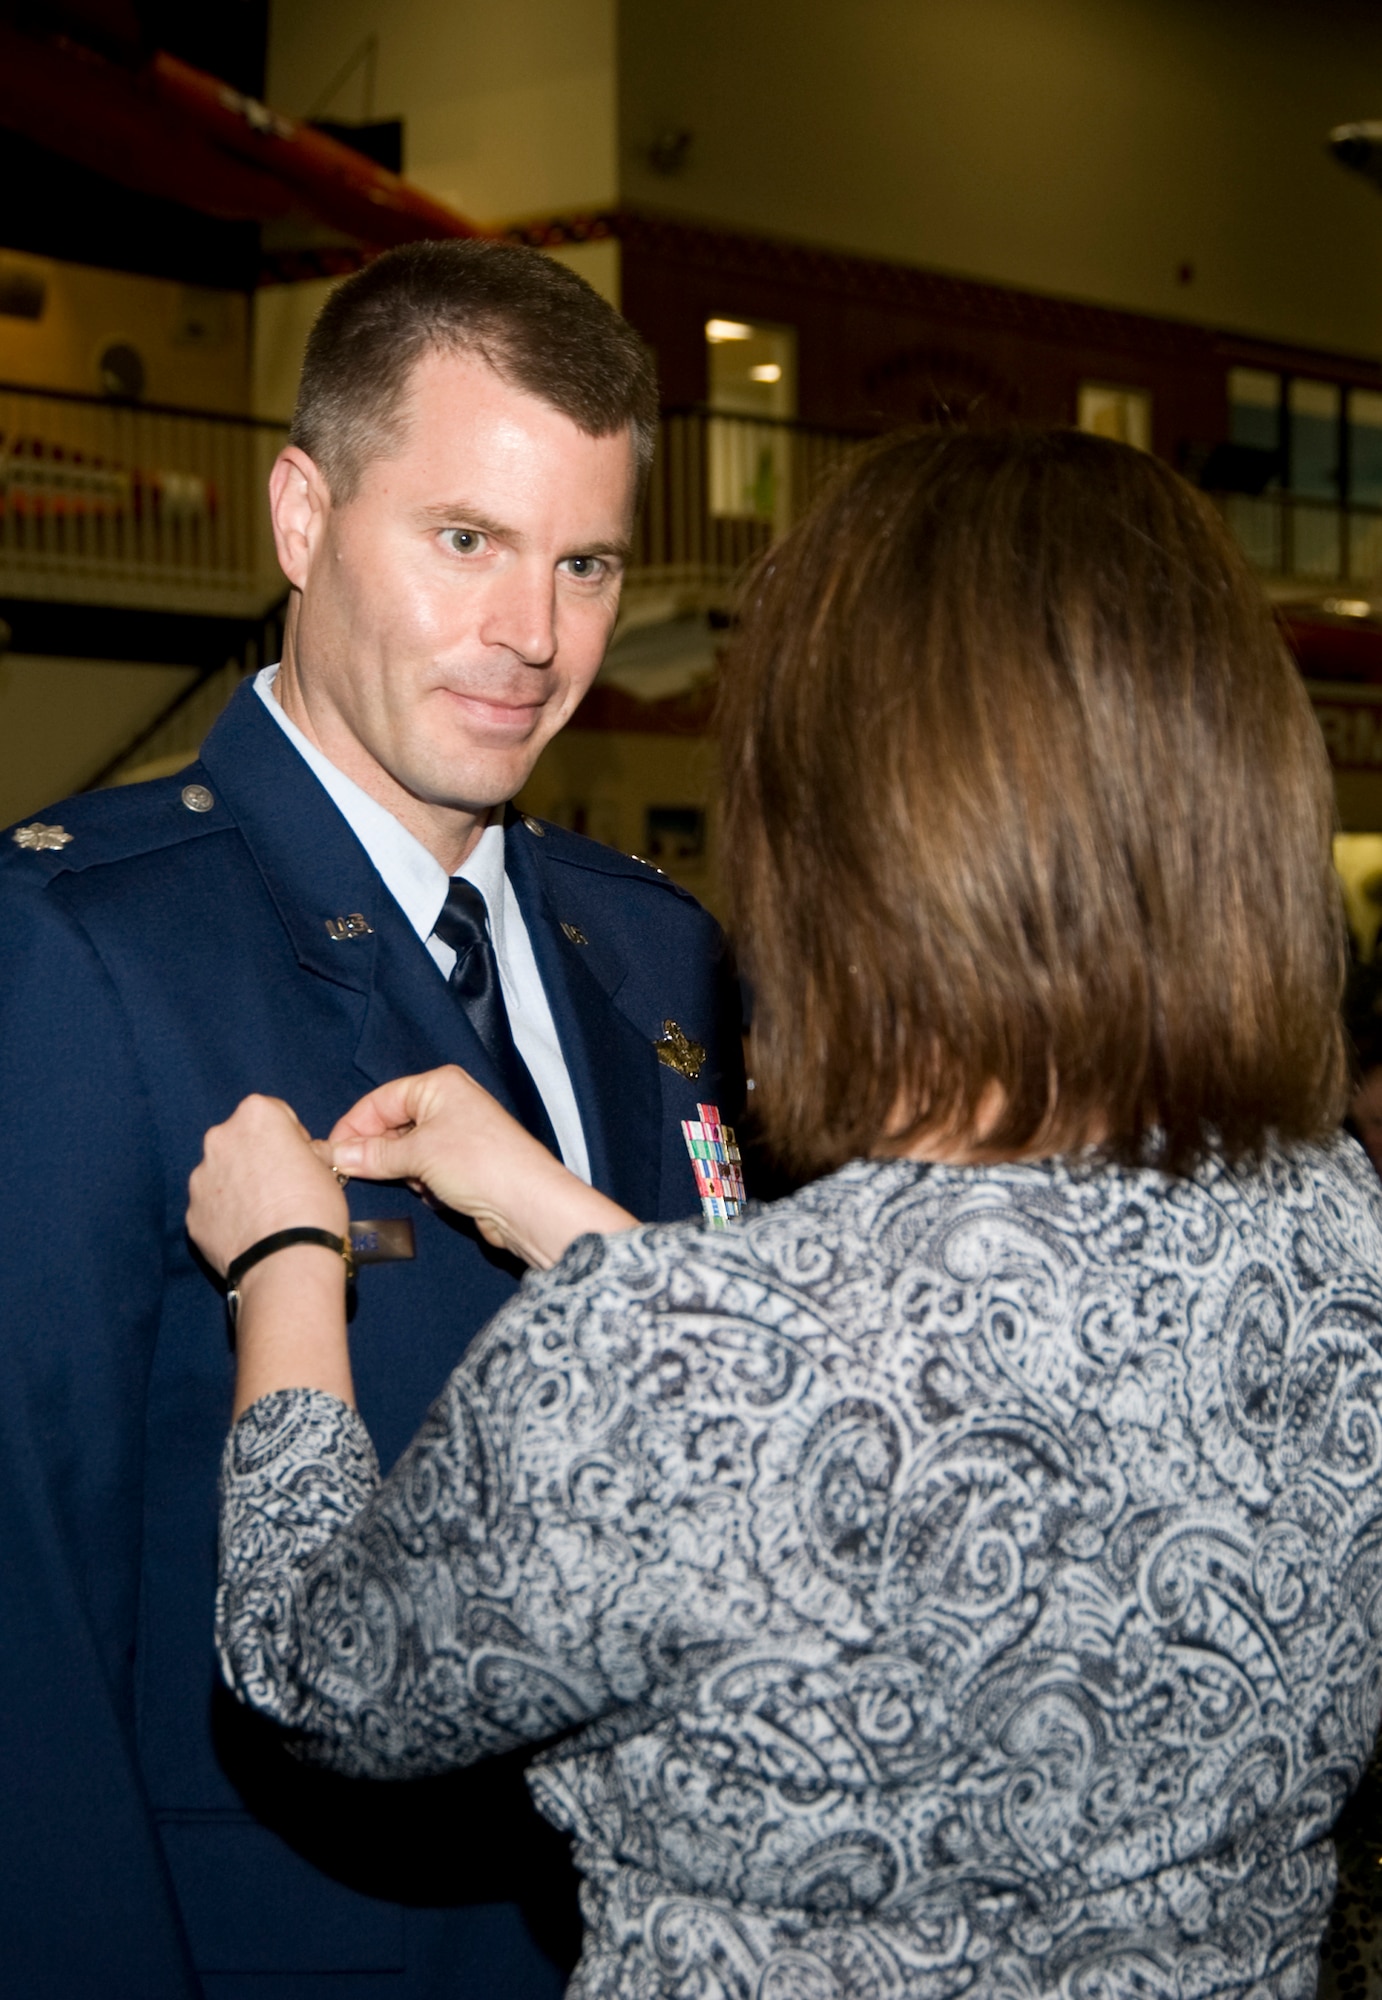 Lt. Col. Gregory Patschke receives his commander's pin from his wife Kathy after assuming command of the 36th Electronic Warfare Squadron during a ceremony at the Air Armanent Center May 2 at Eglin Air Force Base, Fla.  He took the reins from Lt. Col. John "Hap" Arnold.  The 36th EWS is part of the 53d Electronic Warfare Group.  U.S. Air Force photo.